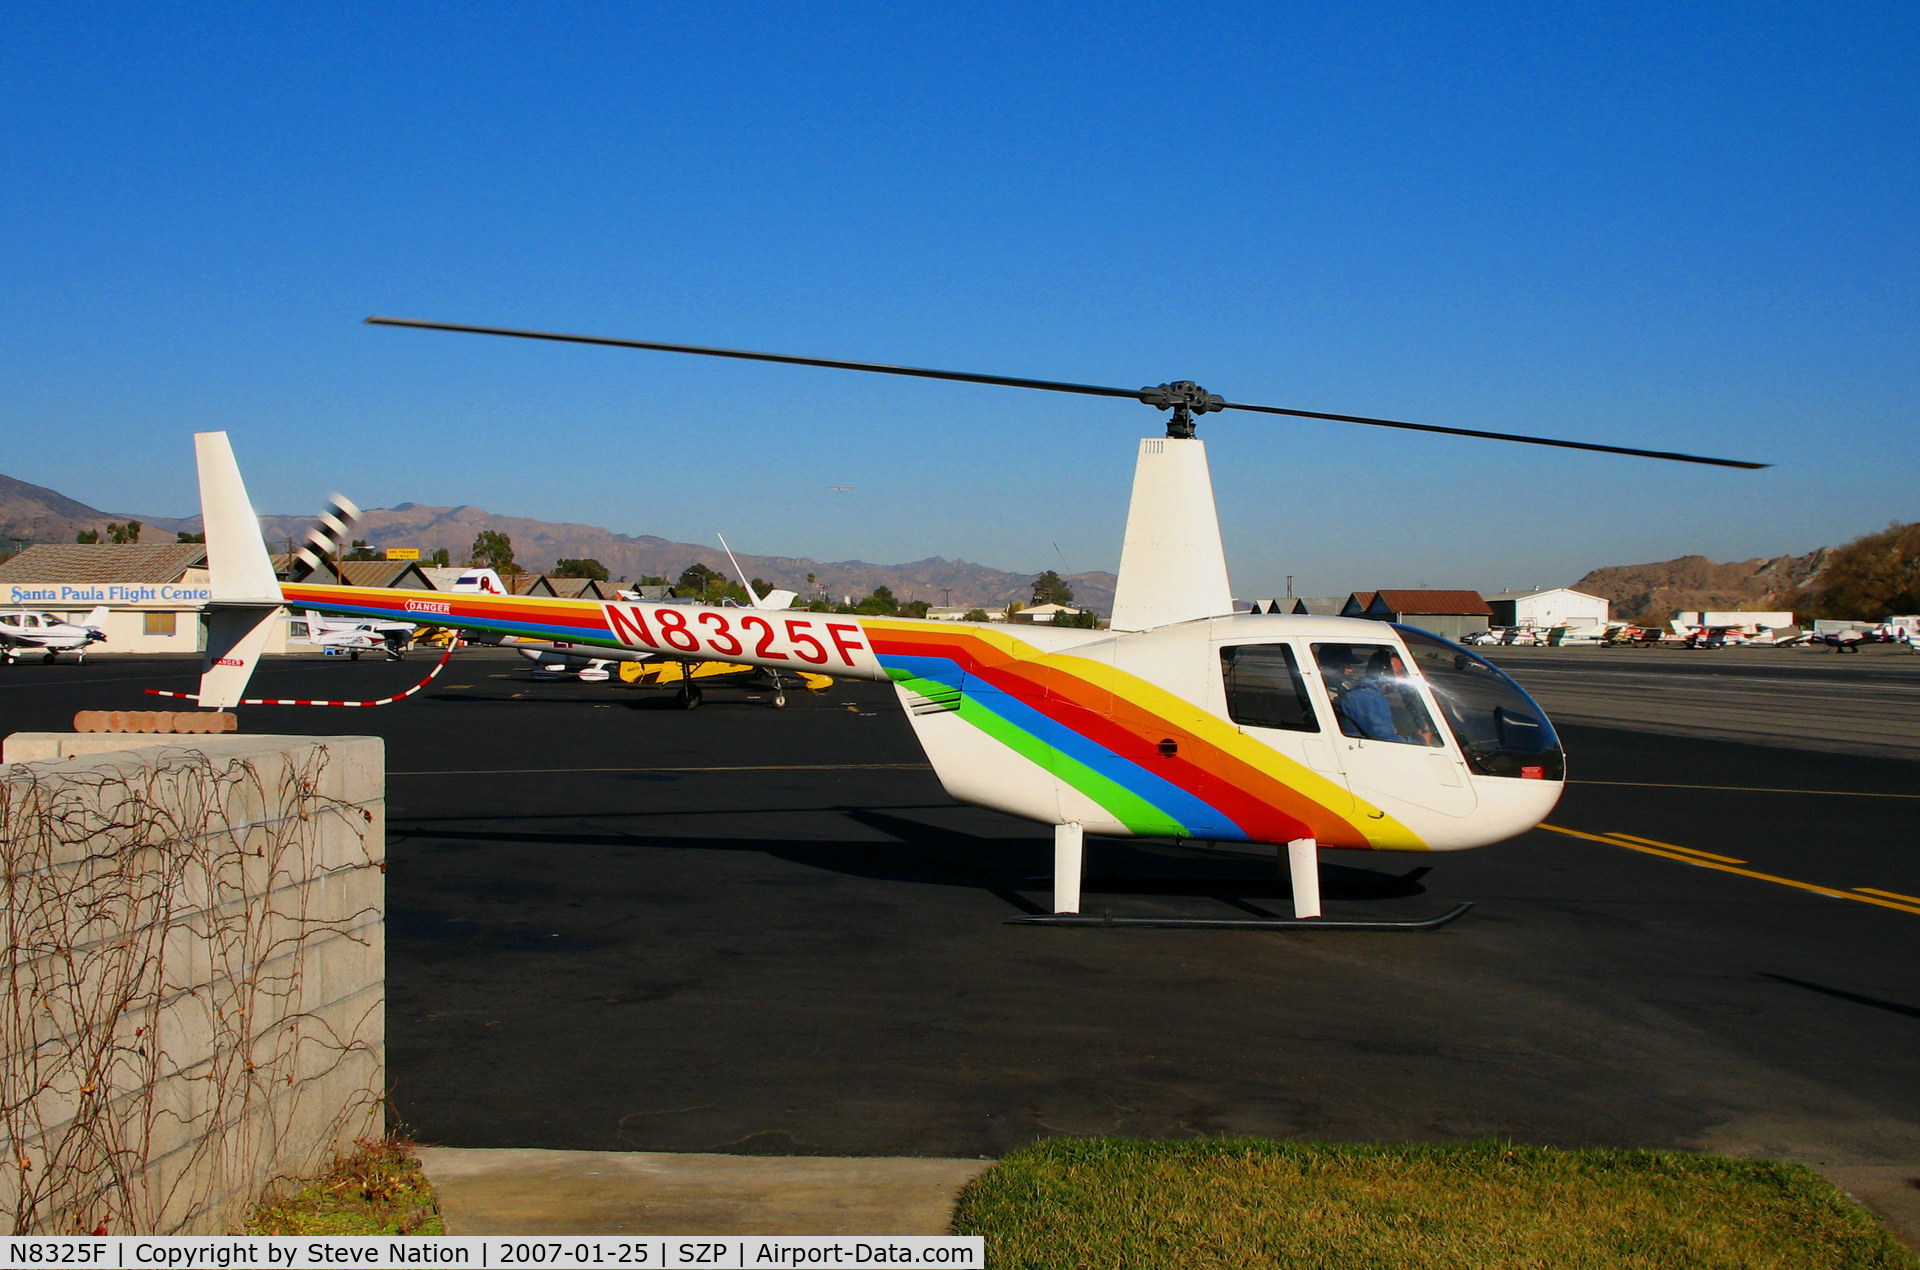 N8325F, 1995 Robinson R44 C/N 0208, Prime Helicopter & AS 1995 Robinson R44 ready for lift off @ Santa Paula Airport, CA